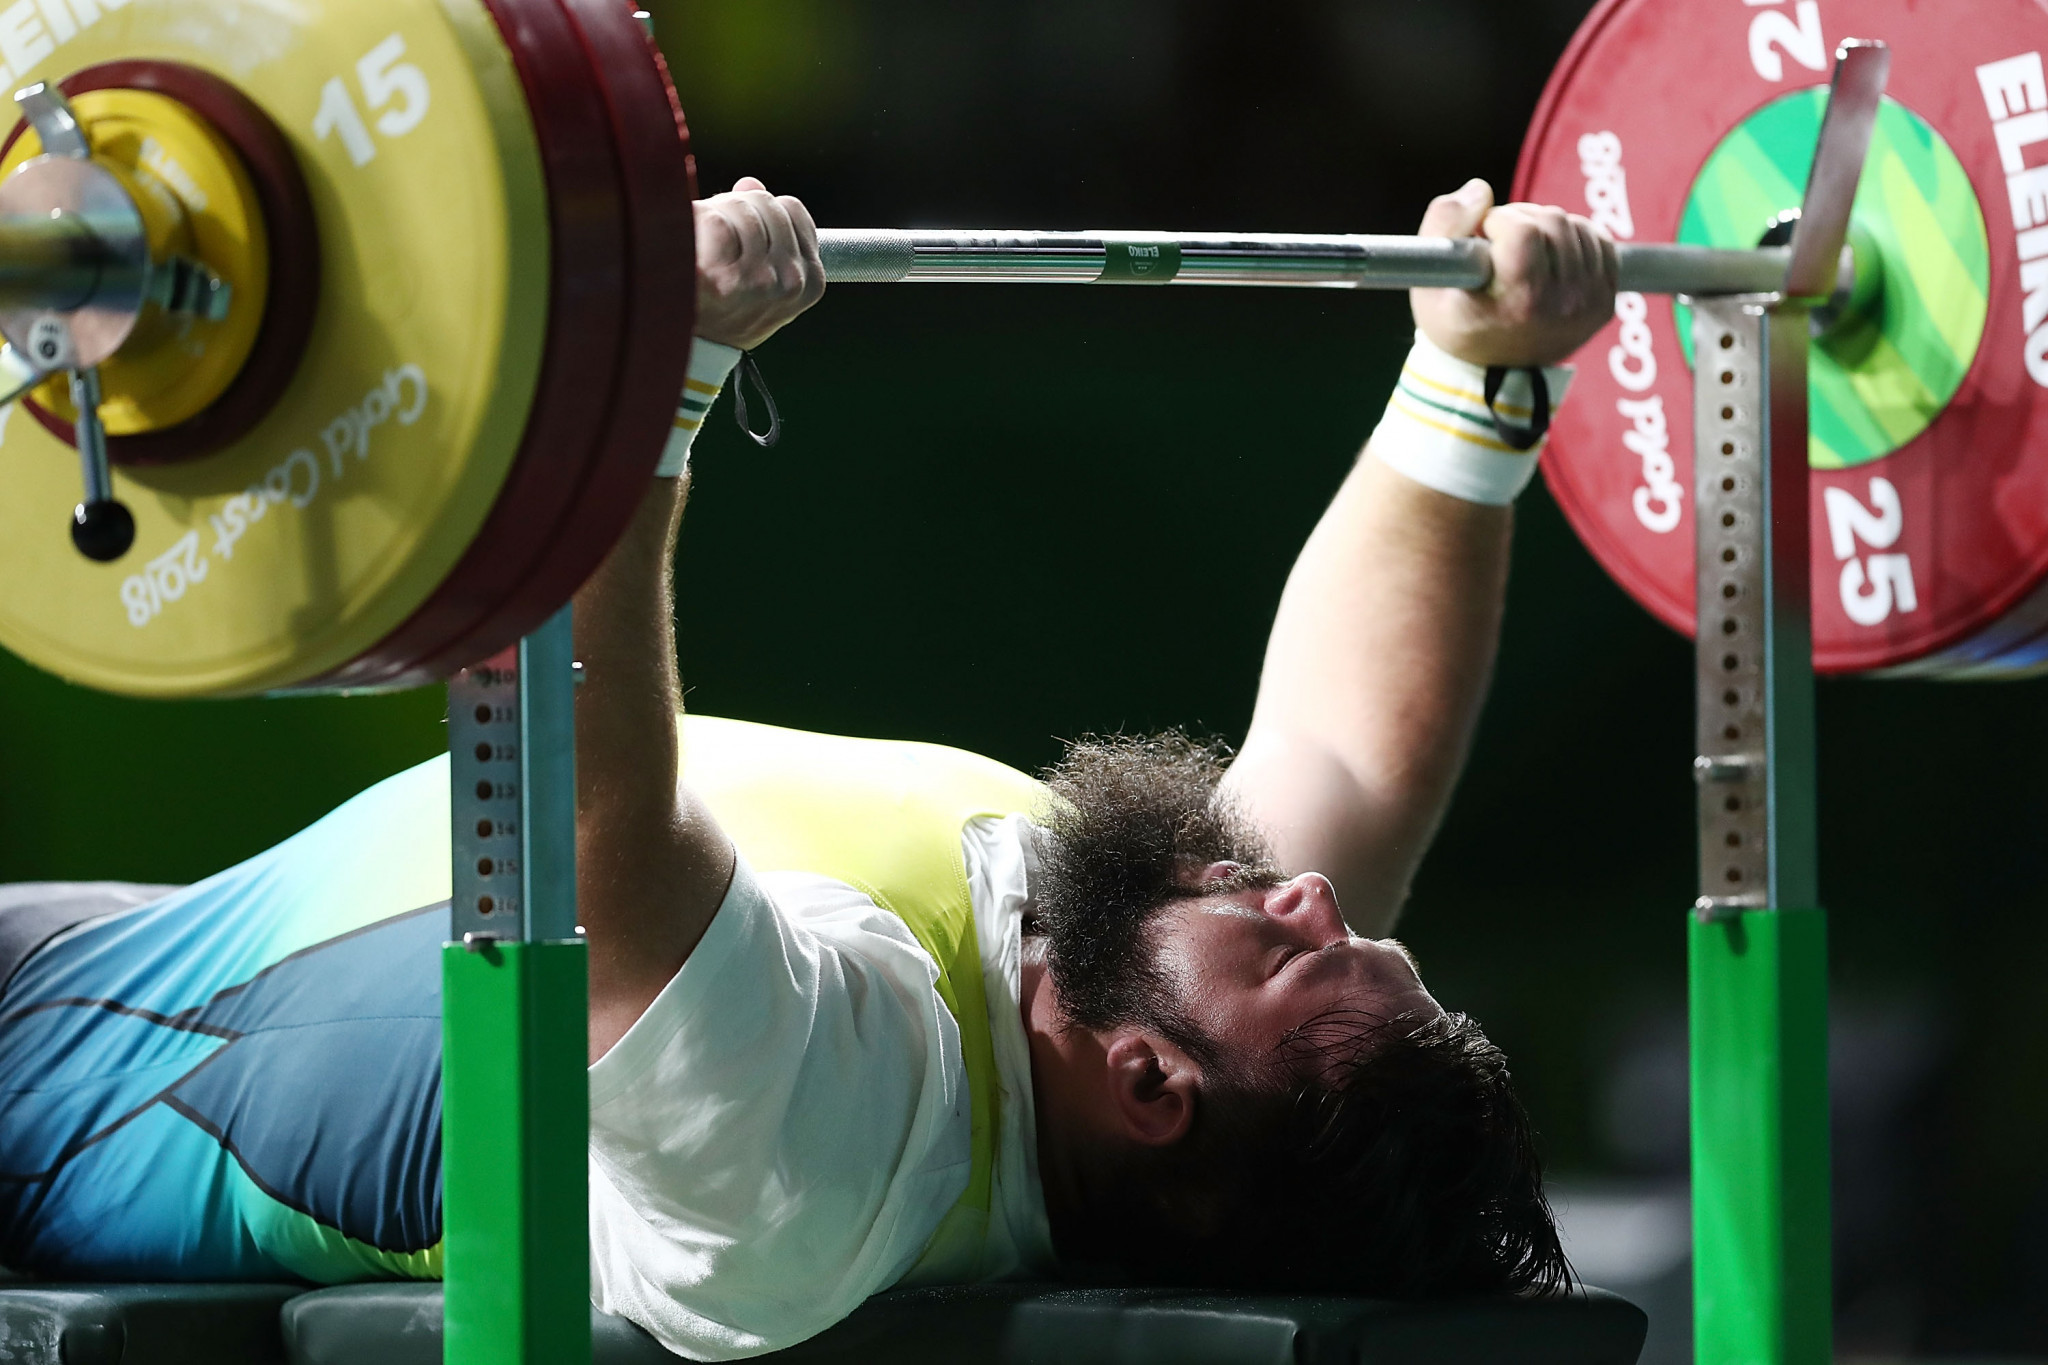 World Para Powerlifting has entered a MoU with BarBend ©Getty Images